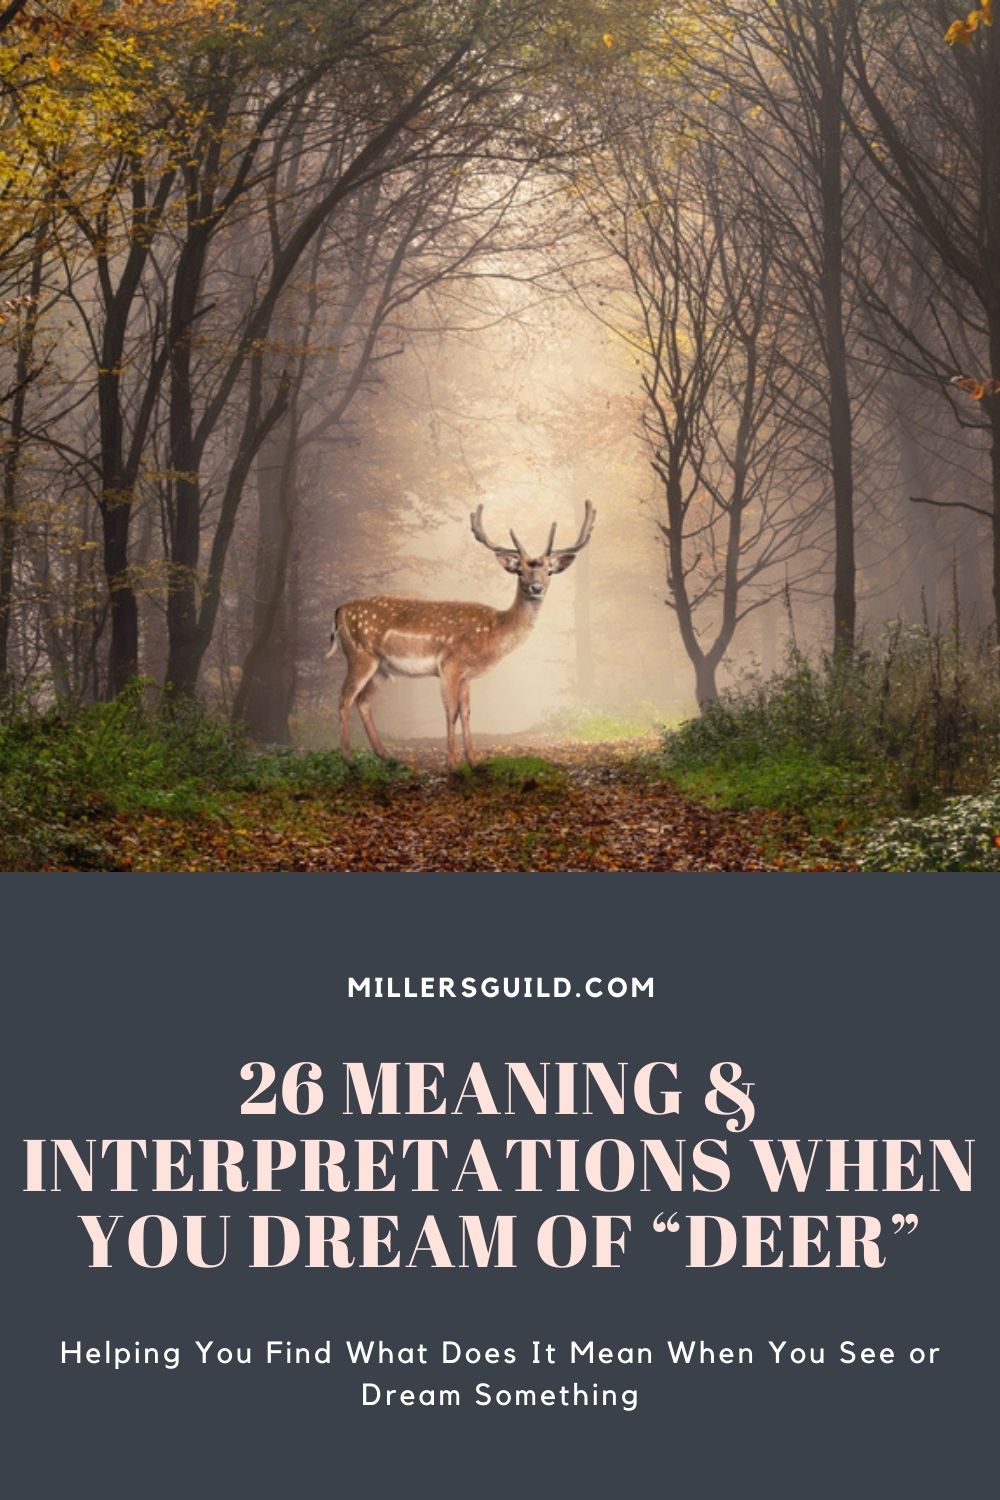 26 Meaning & Interpretations When You Dream Of “Deer” 1